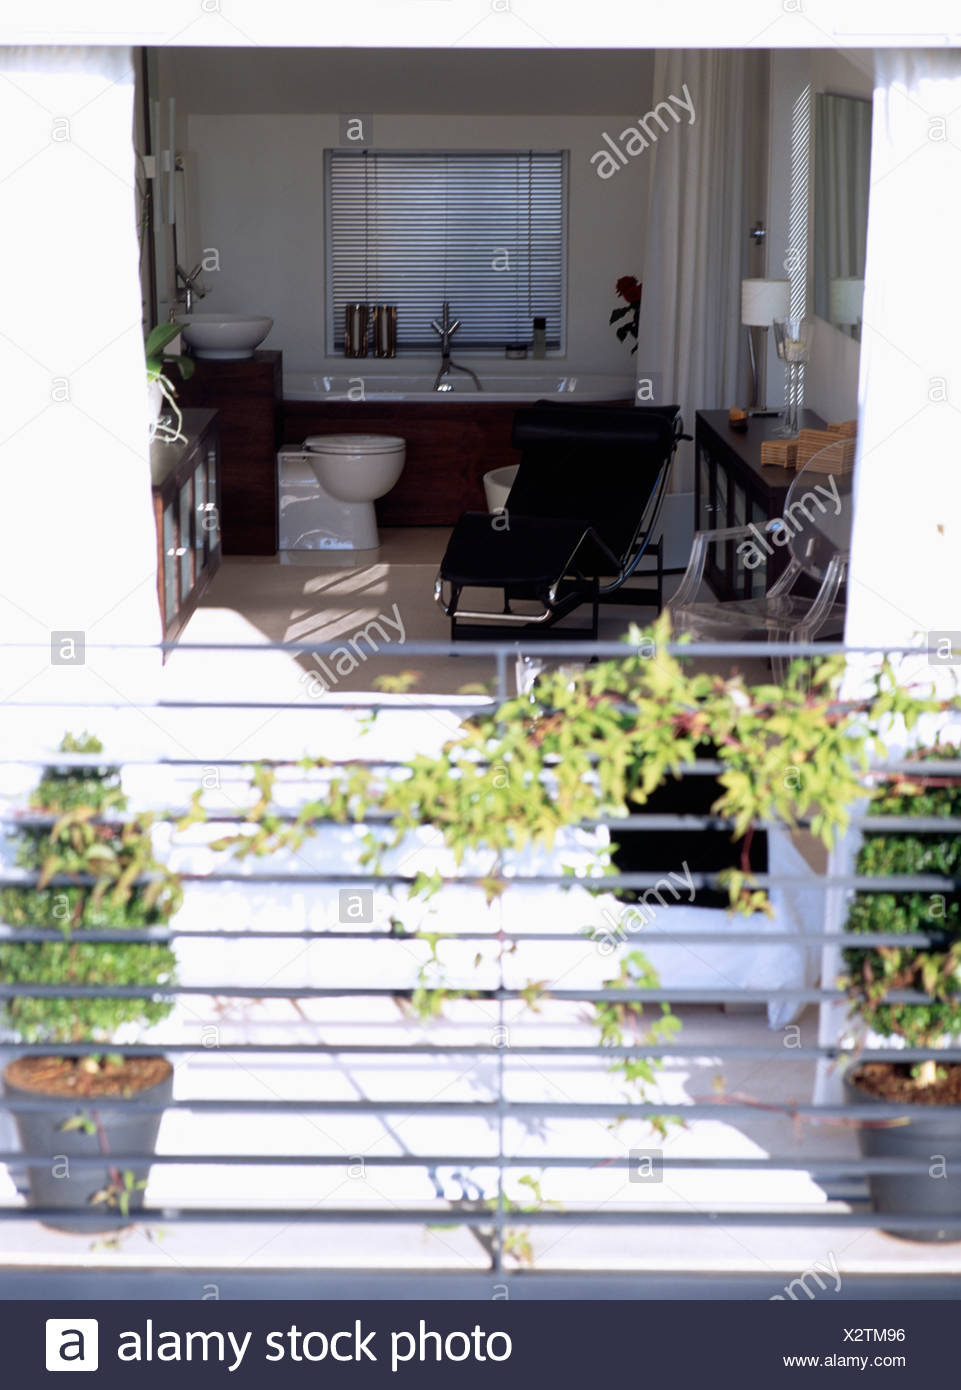 View From Balcony With Metal Railings Of Modern Black And